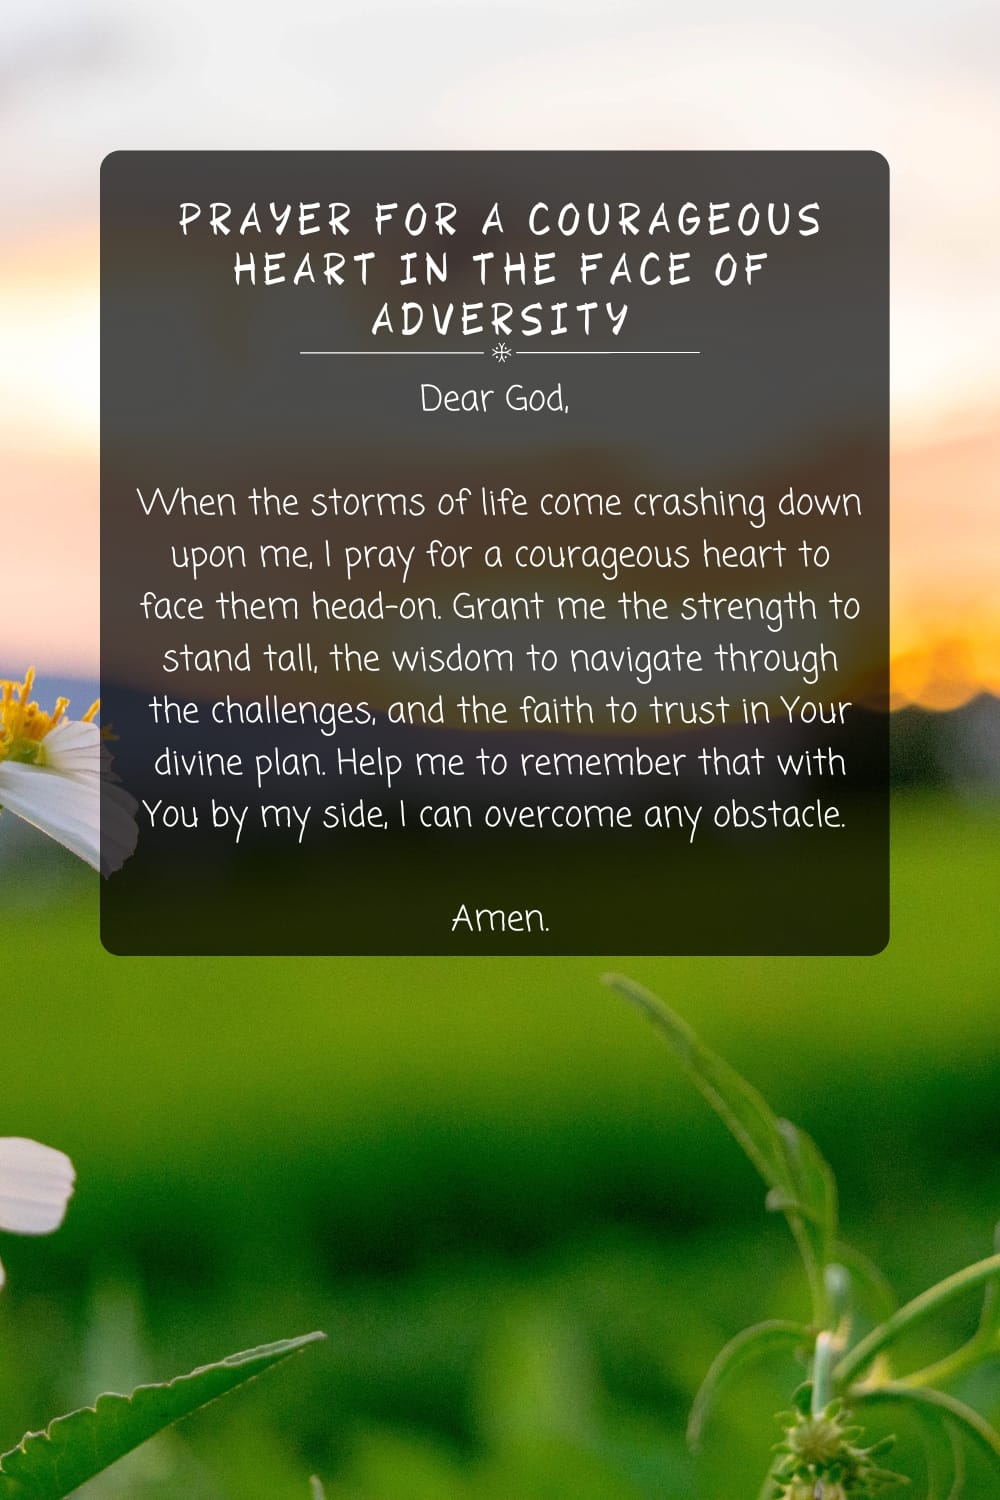 Prayer for a Courageous Heart in the Face of Adversity